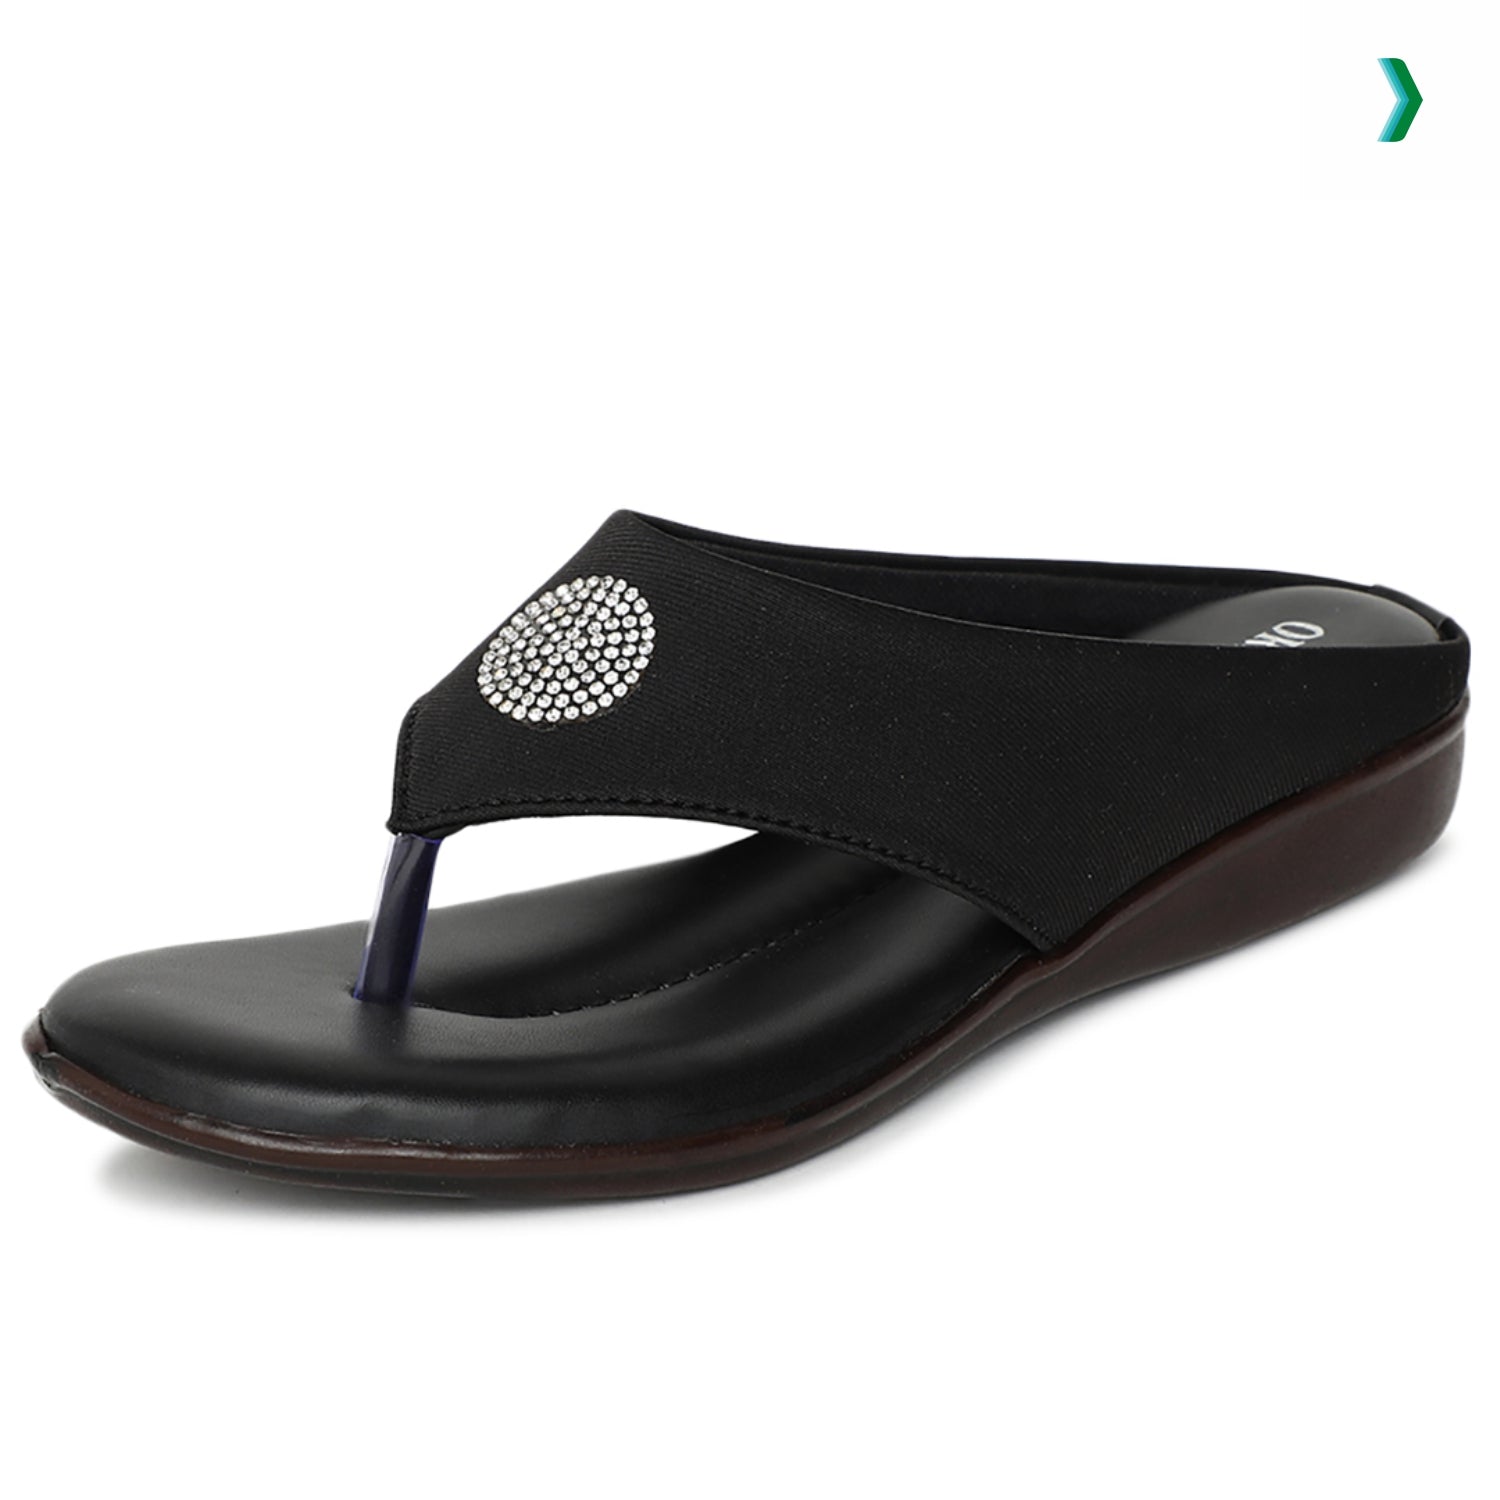 orthopedic slippers for women , doctor chappal for ladies